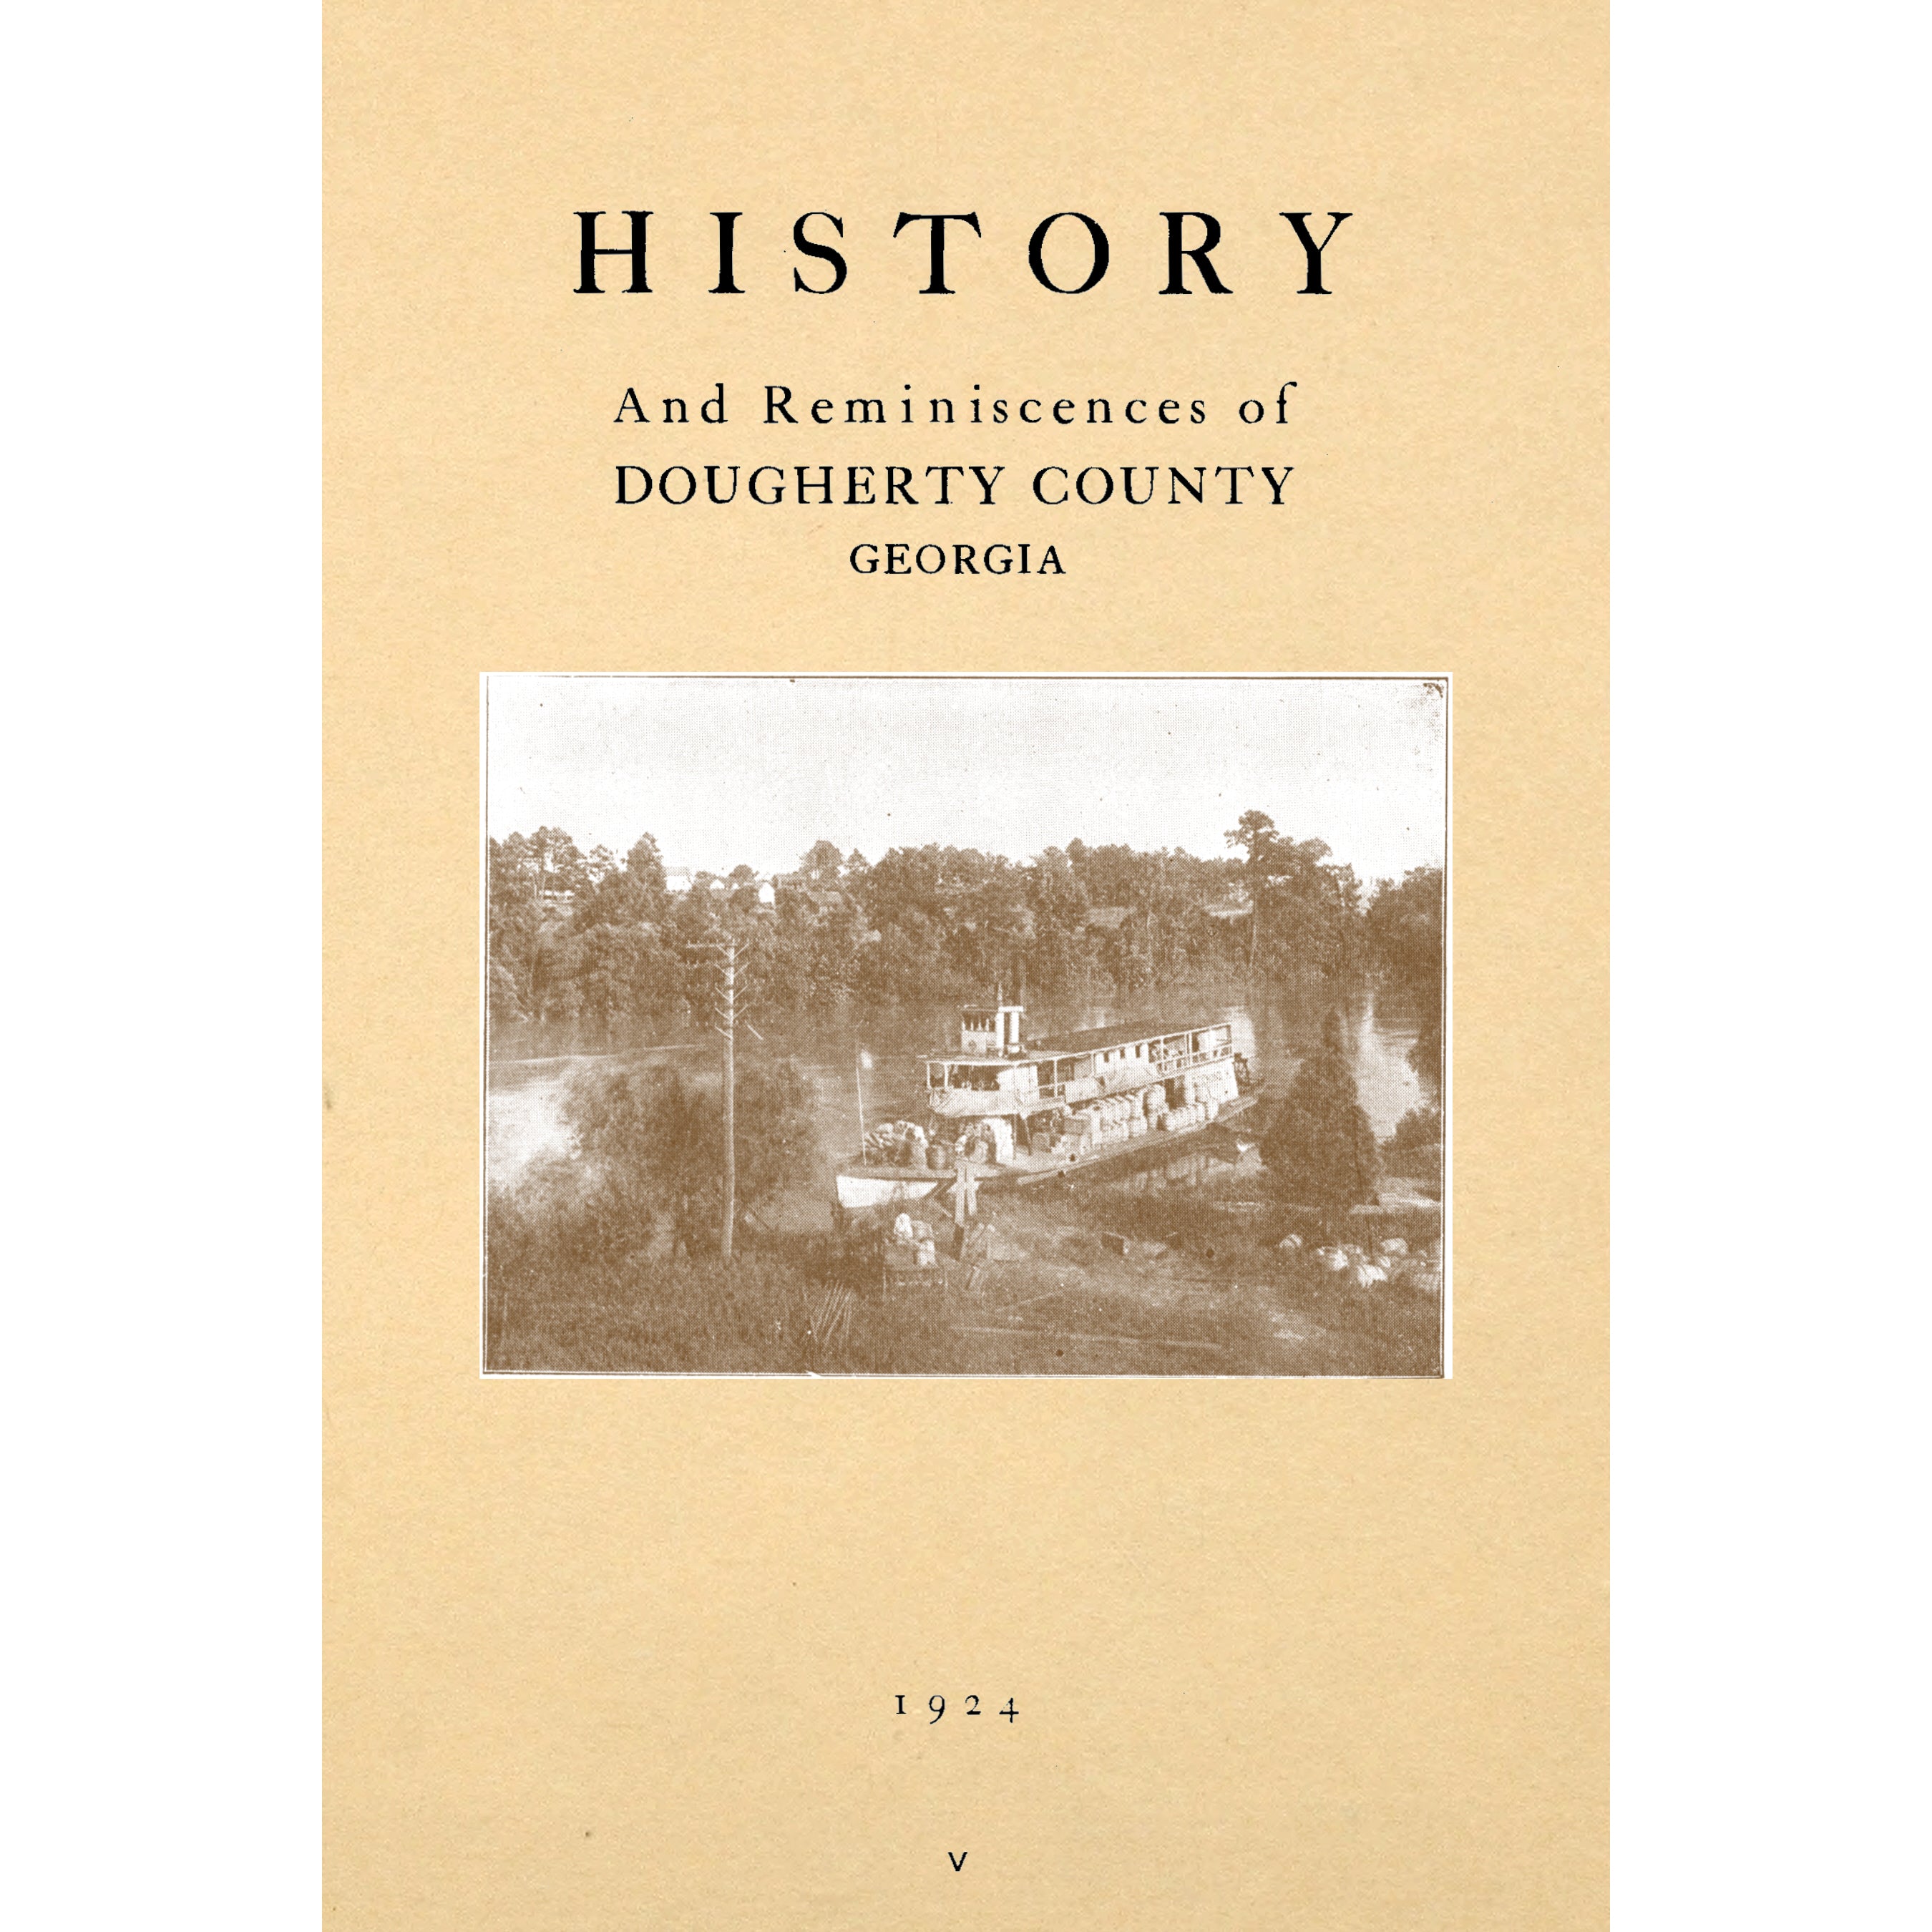 History and Reminiscences of Dougherty County, Georgia